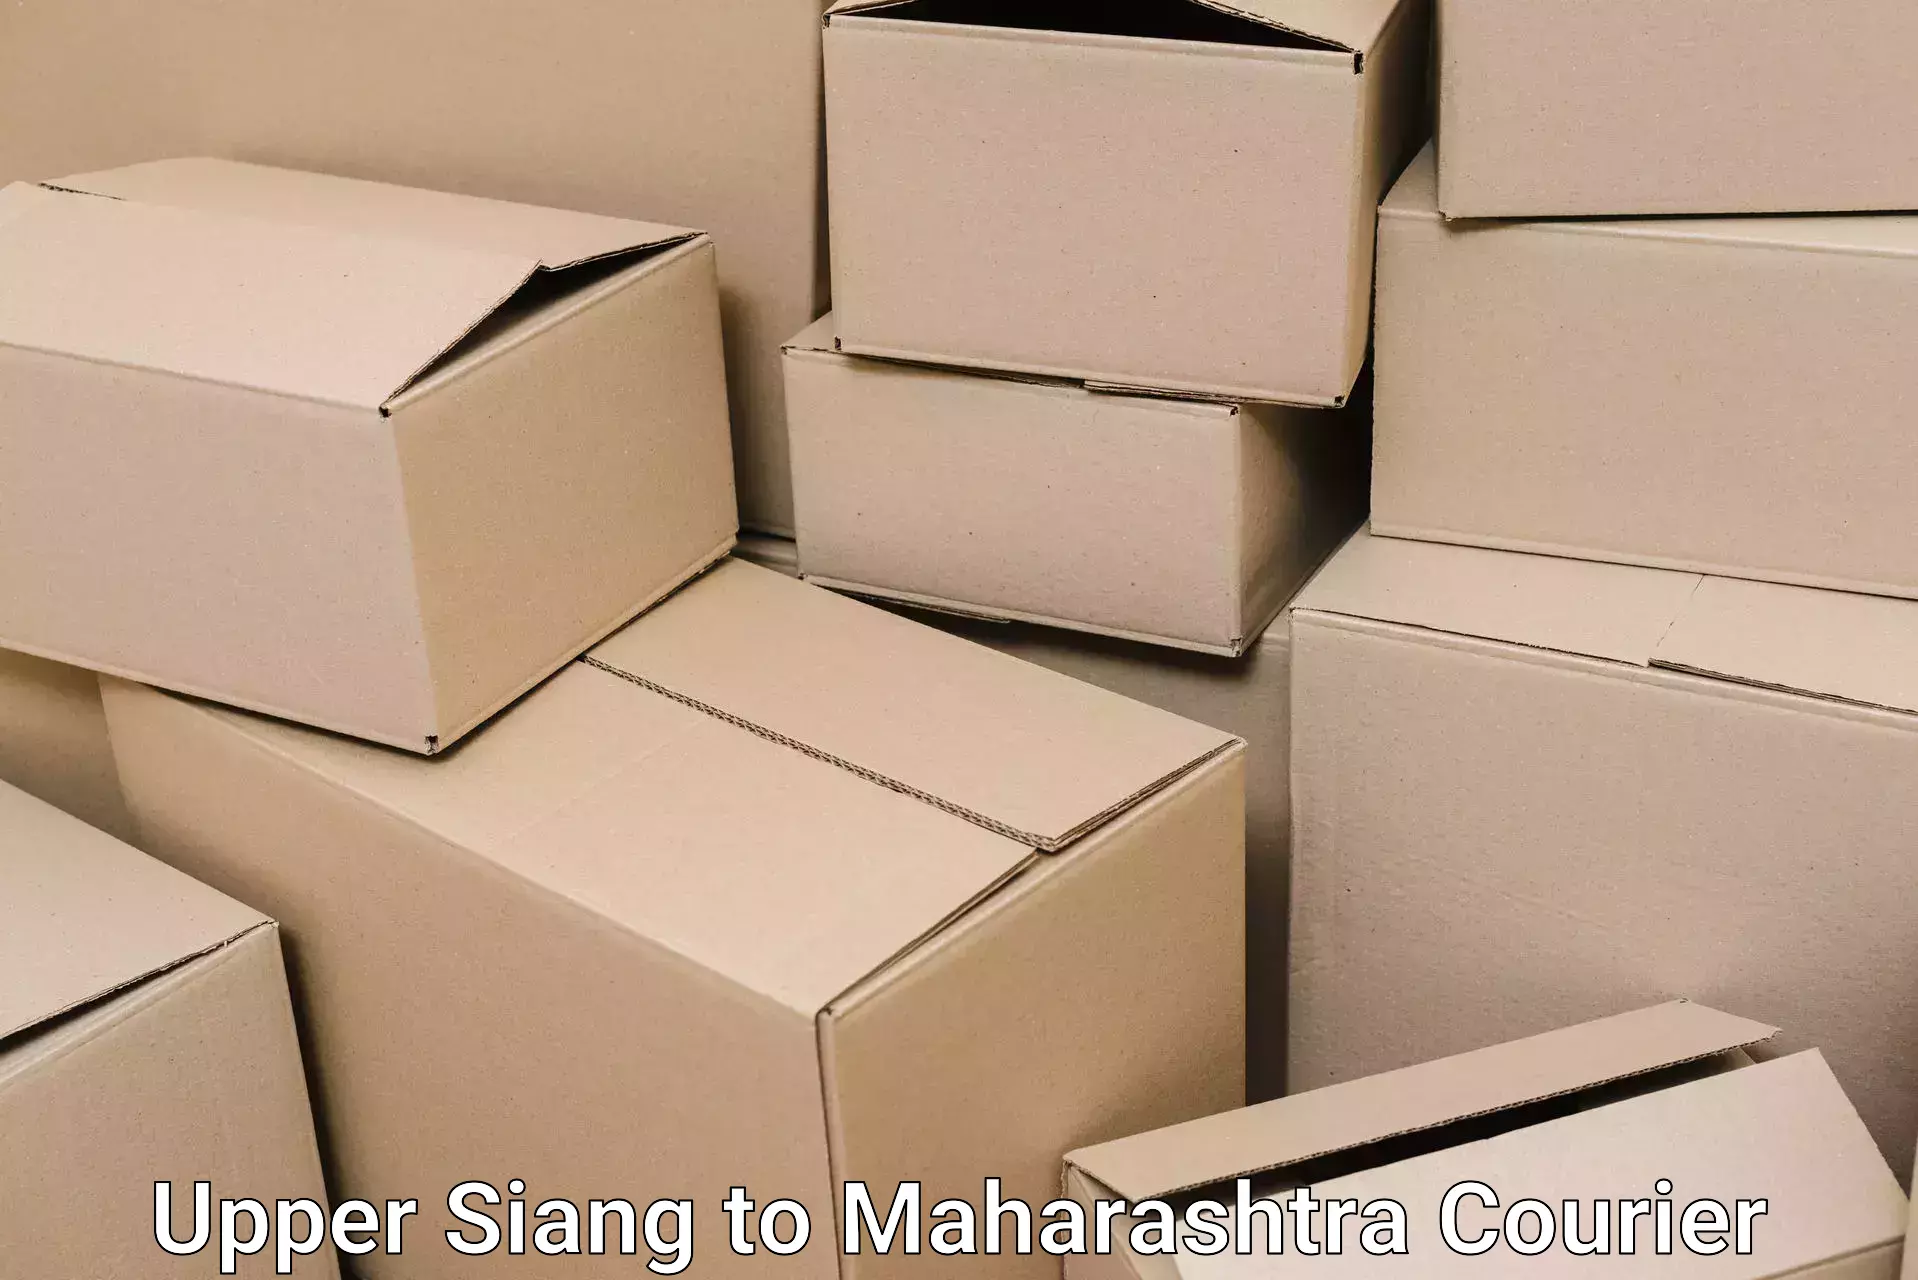 Professional moving company Upper Siang to Chandrapur